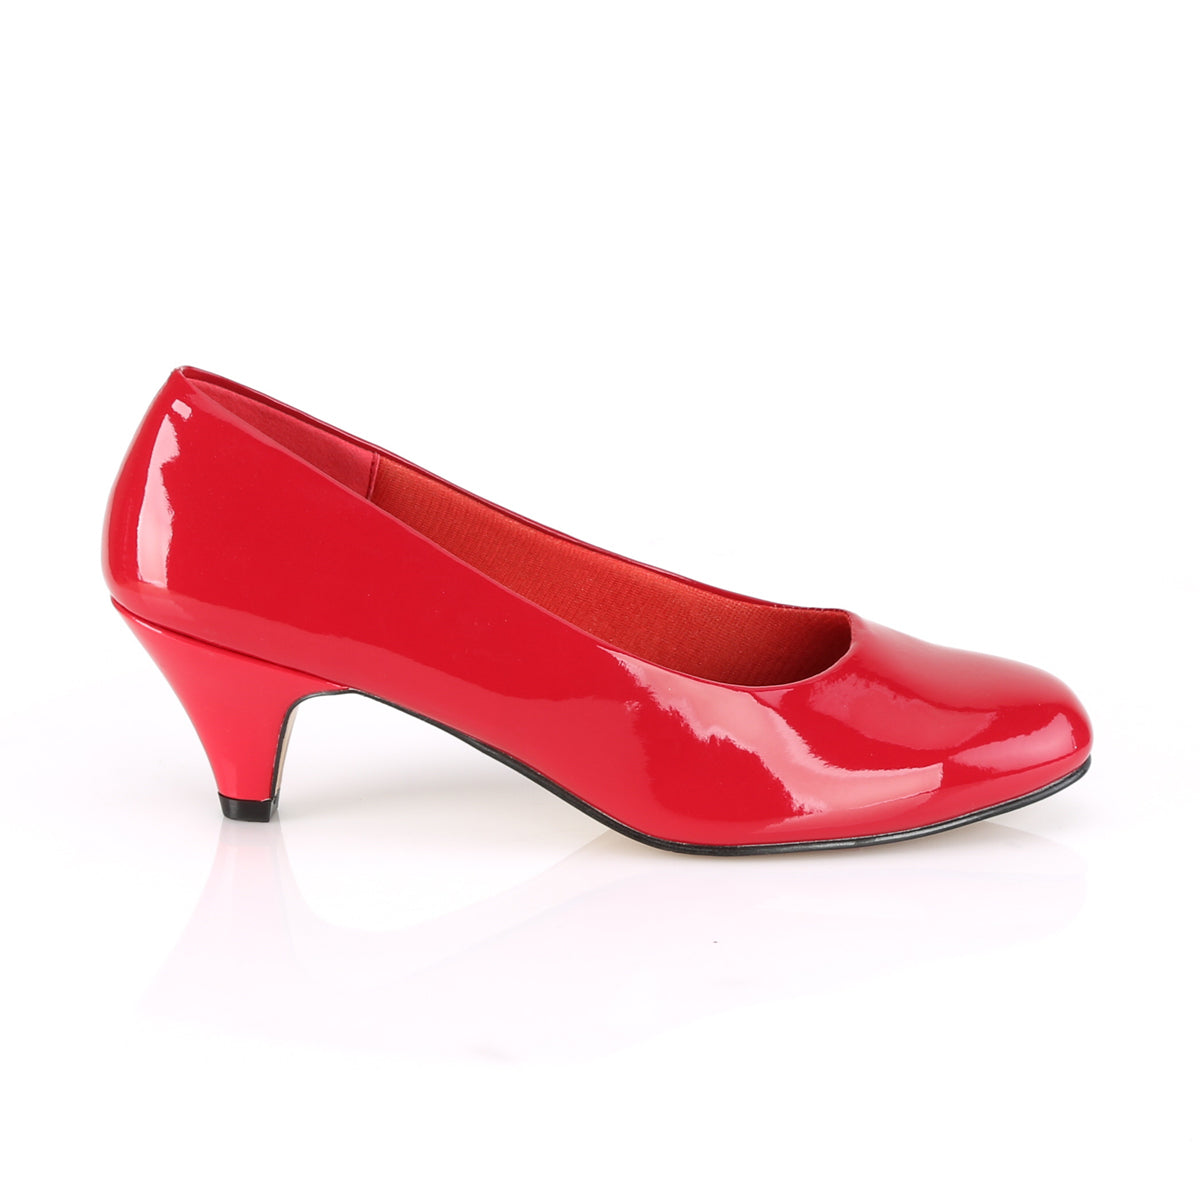 Pleaser Pink Label Womens Pumps FEFE-01 Red Pat